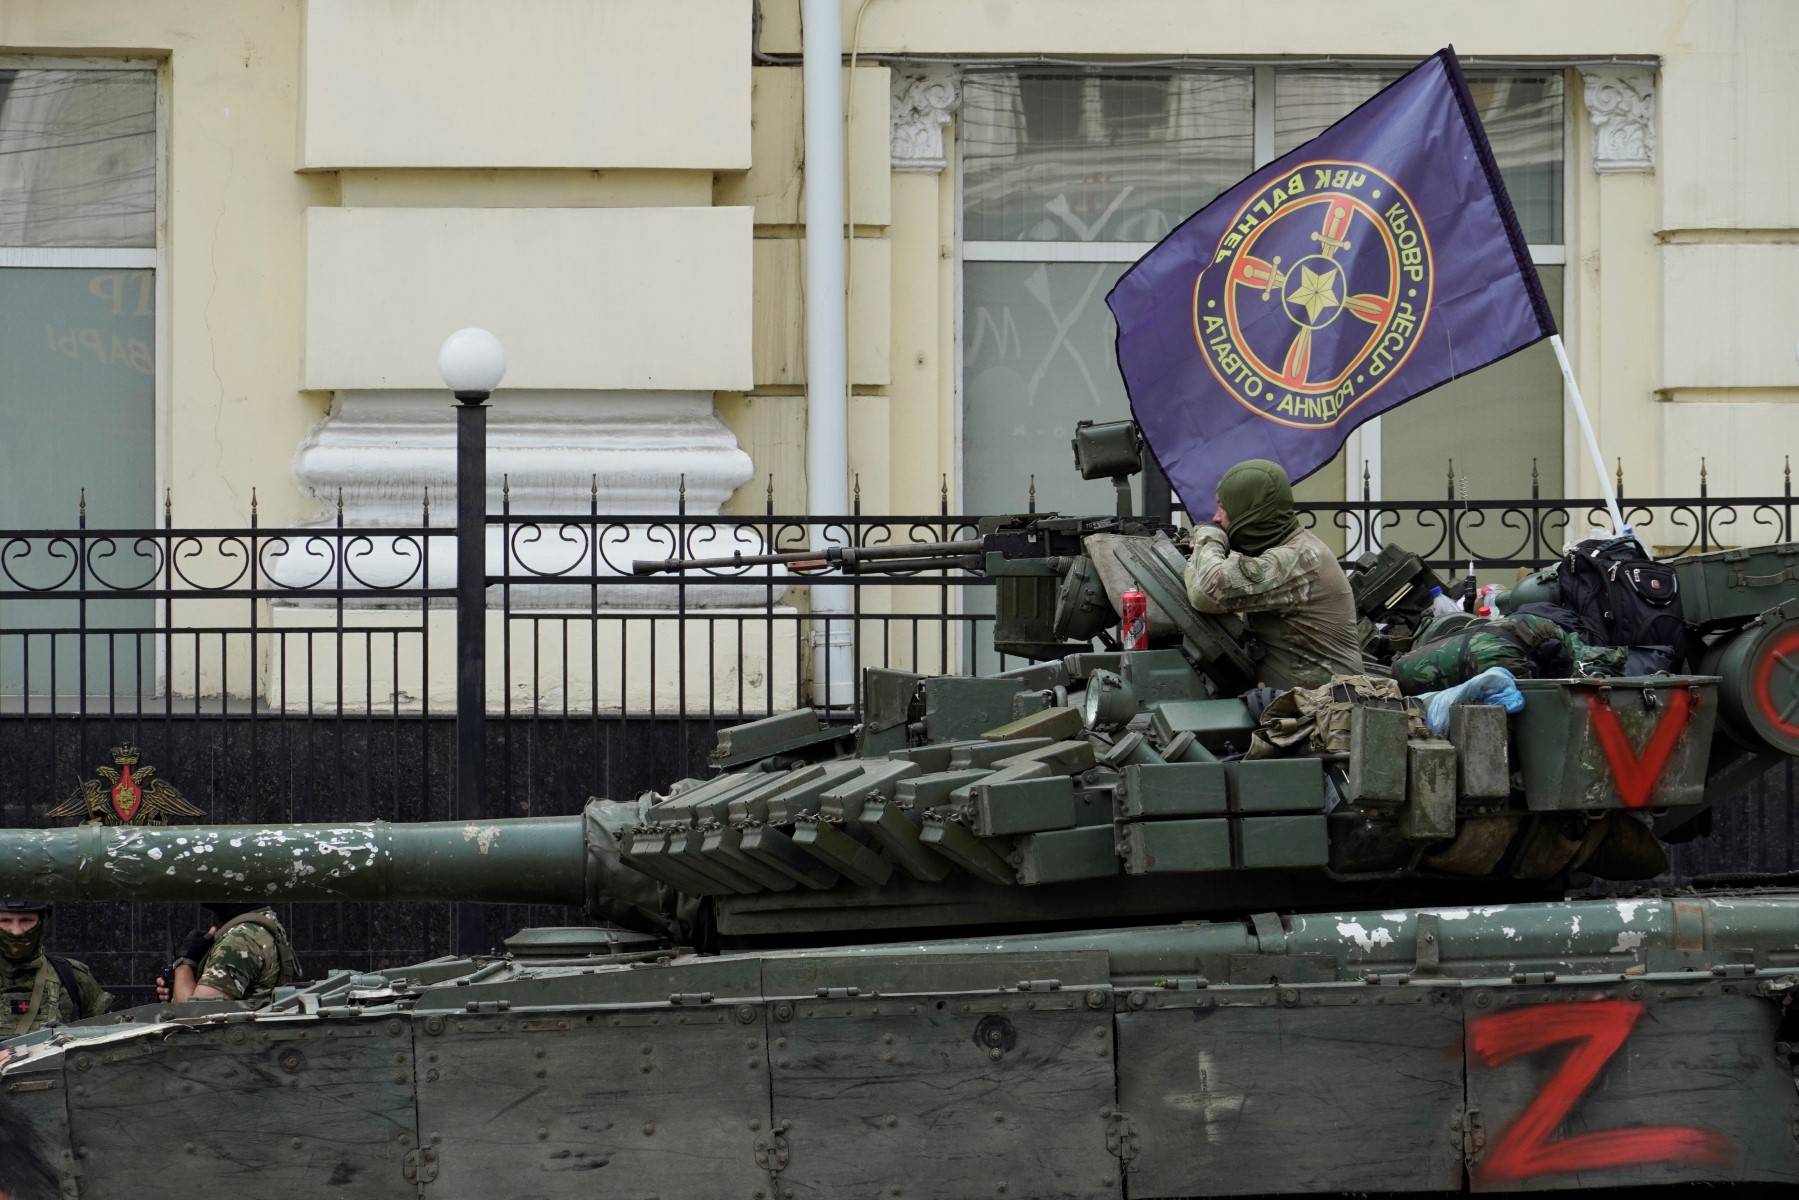 Members of Wagner group sit atop of a tank in a street in the city of Rostov-on-Don, on June 24, 2023. - President Vladimir Putin on June 24, 2023 said an armed mutiny by Wagner mercenaries was a "stab in the back" and that the group's chief Yevgeny Prigozhin had betrayed Russia, as he vowed to punish the dissidents. Prigozhin said his fighters control key military sites in the southern city of Rostov-on-Don. (Photo by STRINGER / AFP)